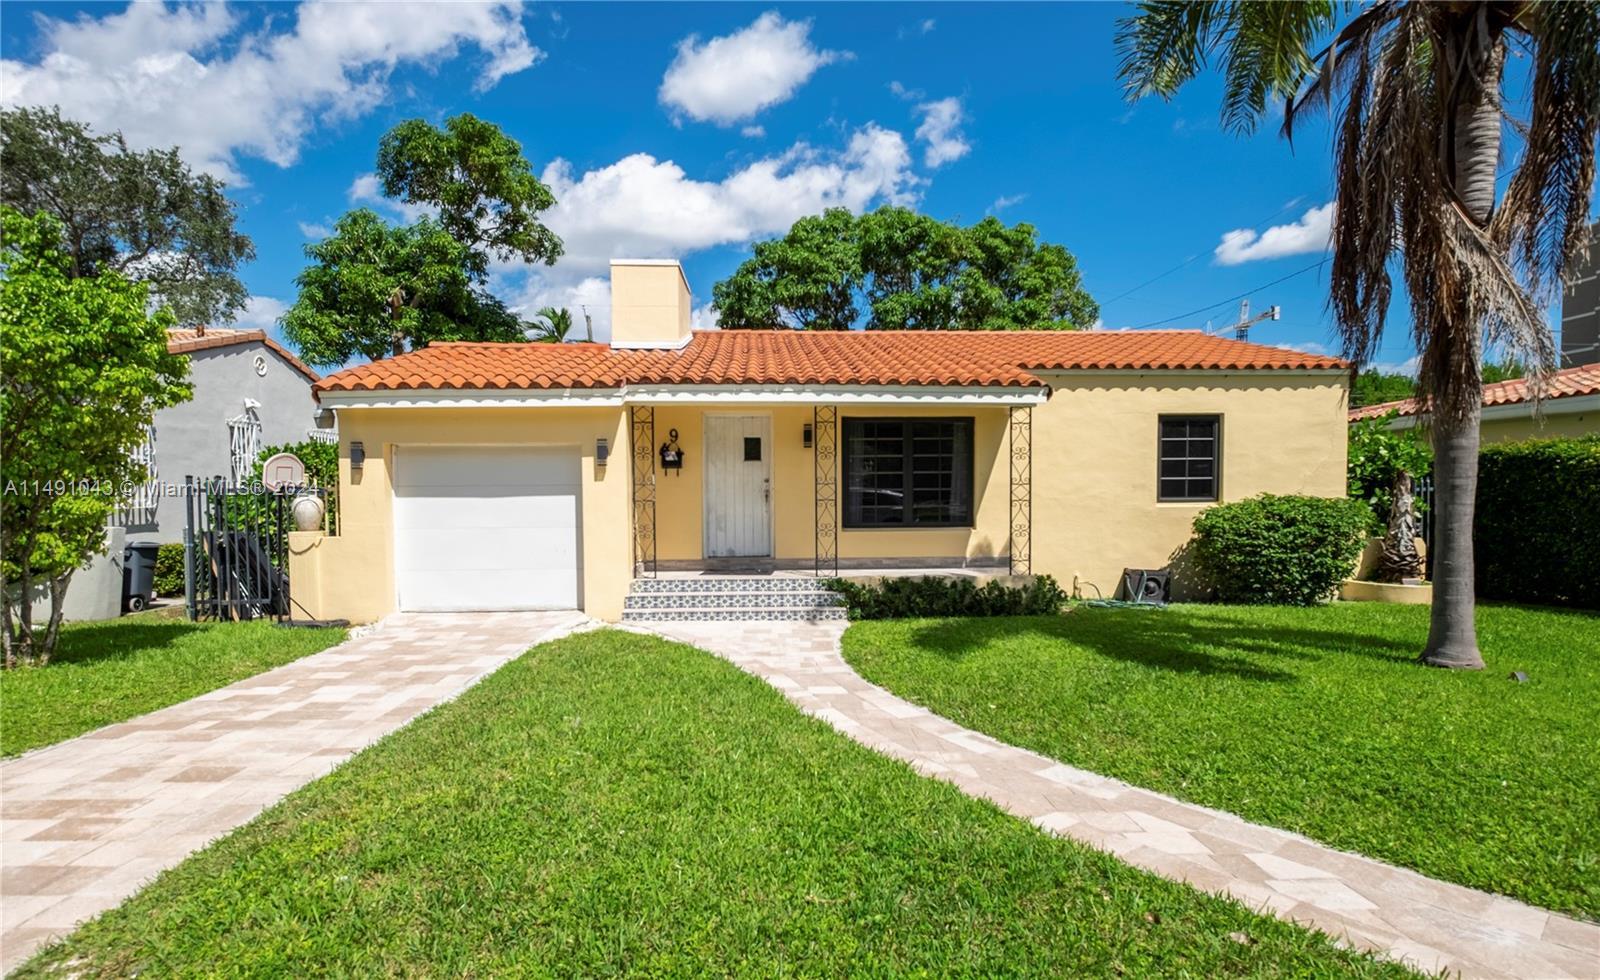 Photo of 9 Campina Ct in Coral Gables, FL